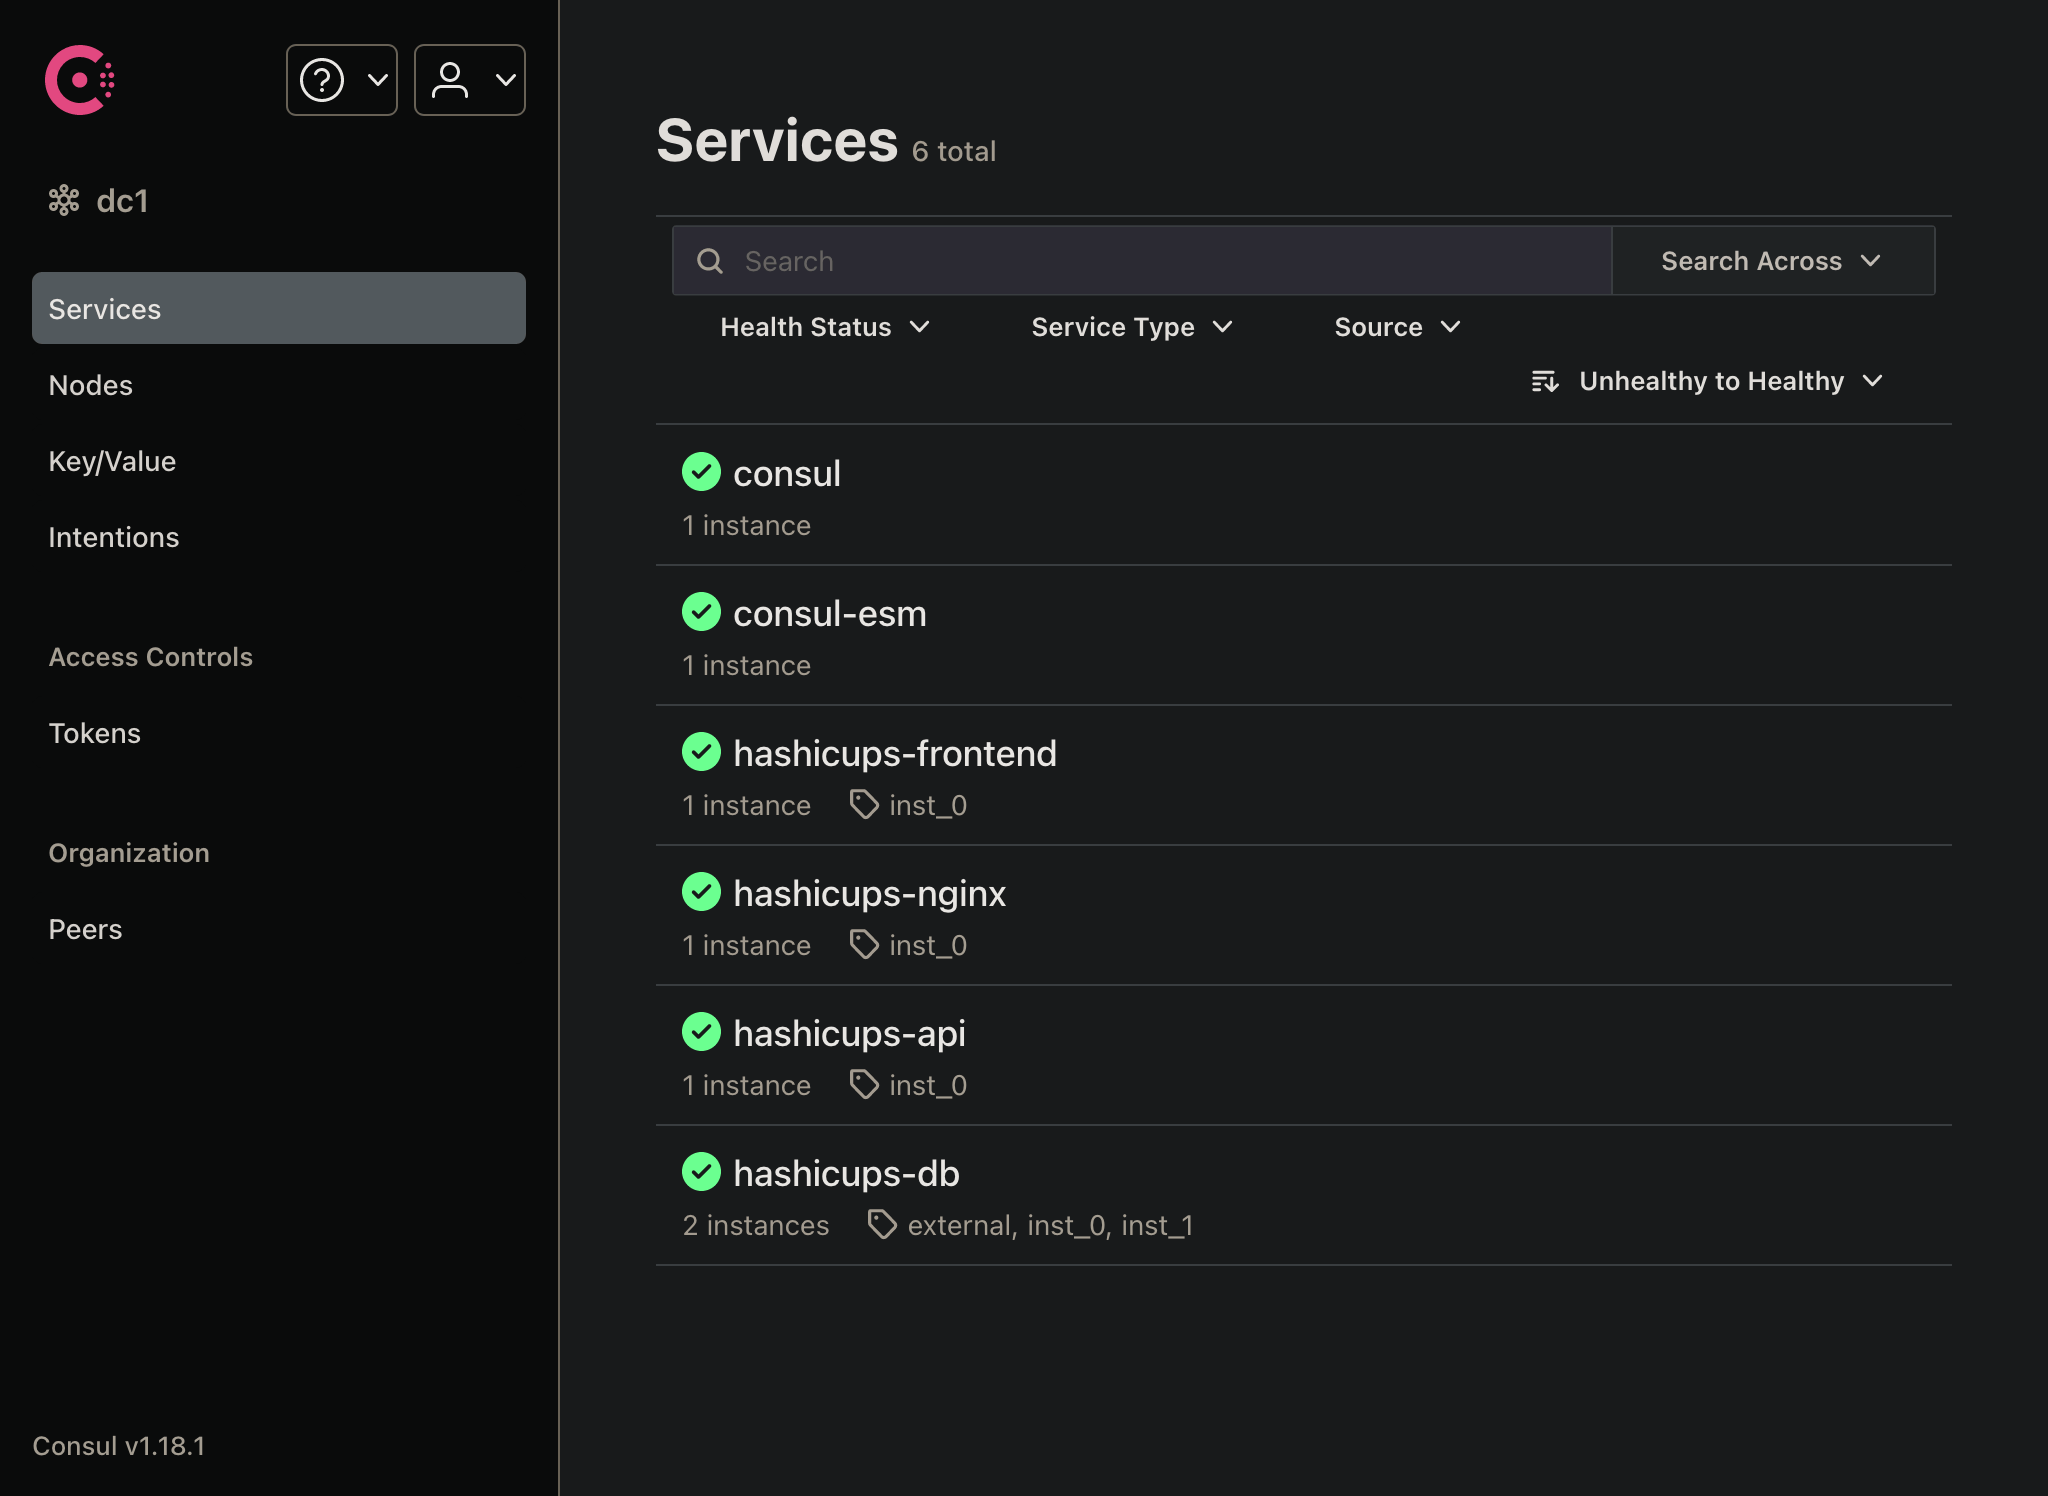 Services page - Multiple DB instances - Both healthy